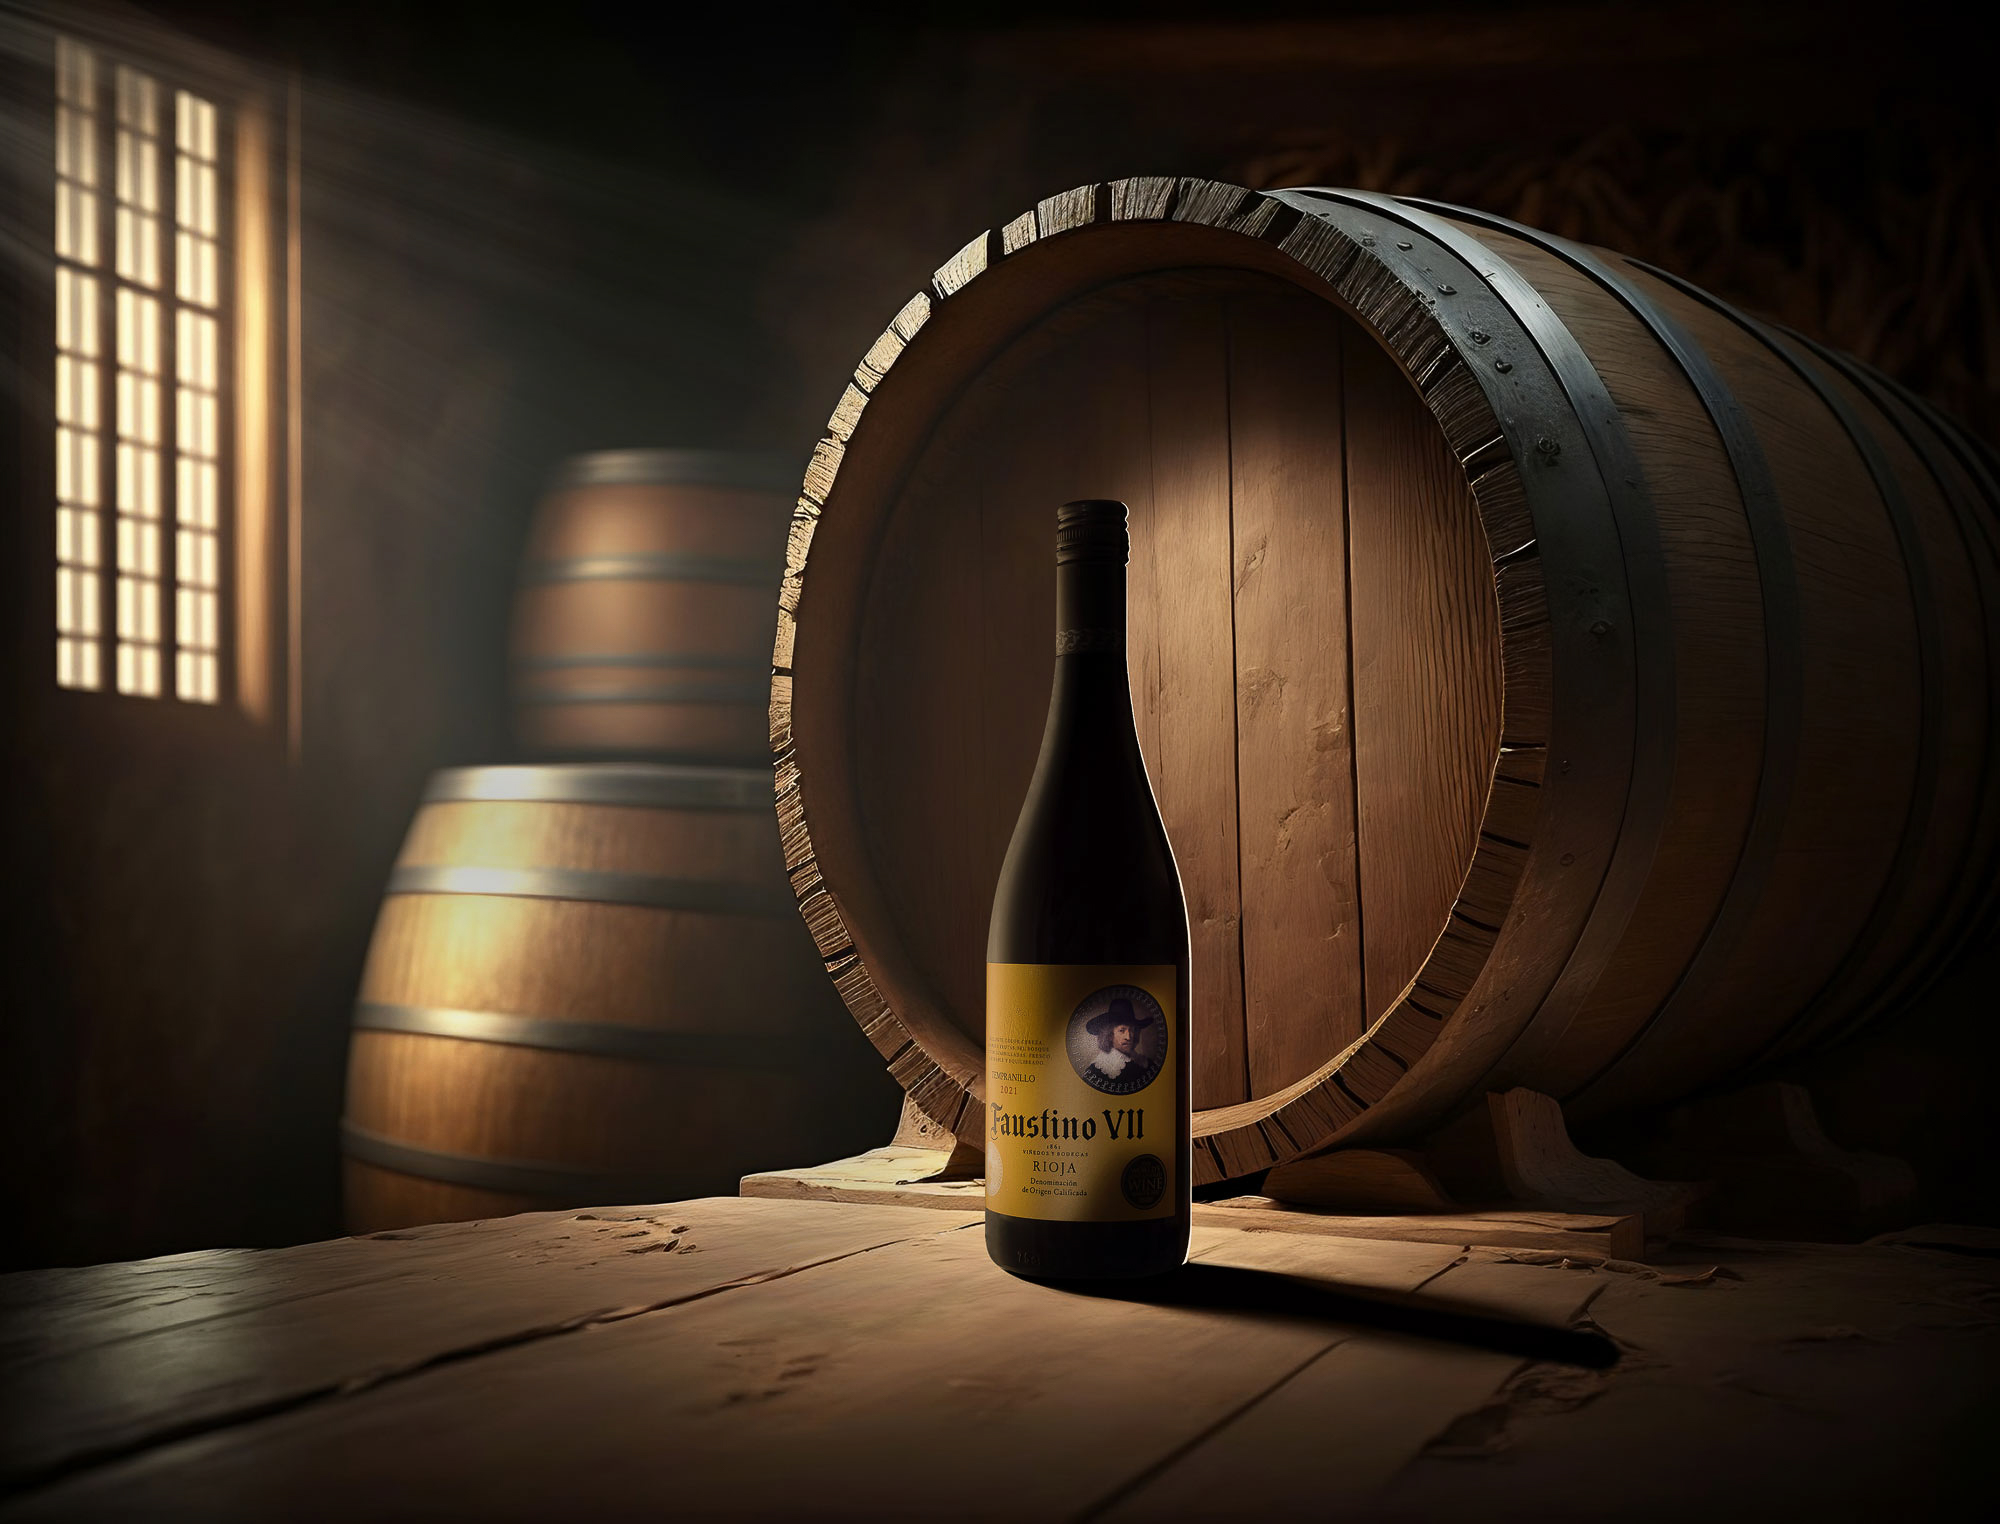 Photo of a bottle of wine in a wine cellar with barrels. the light is warm and light rays come from a window on the left which lights the bottle. Photo by Food drink and commercial aberdeen photographer scott cameron baxter